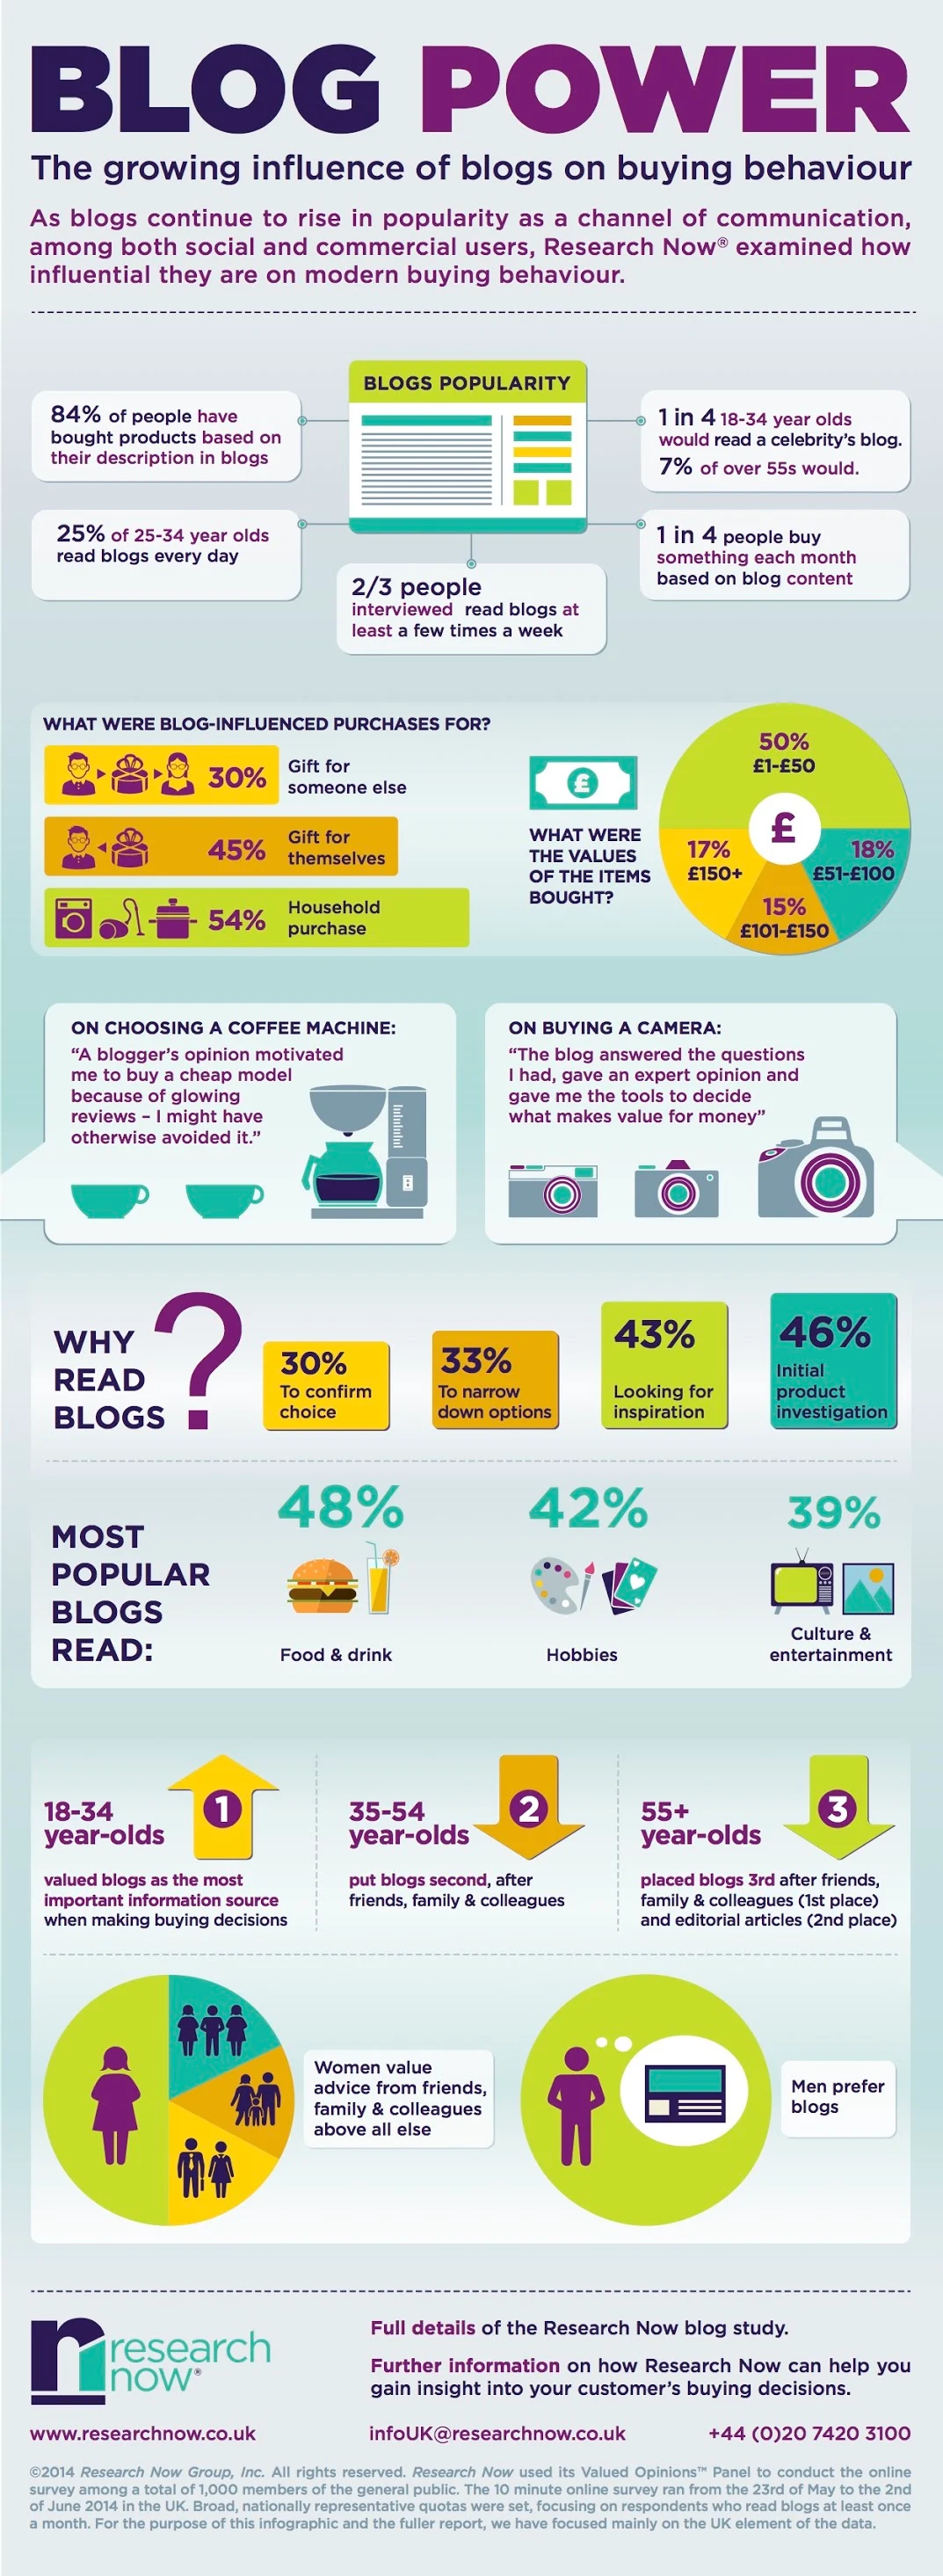 Power of Content Marketing: The Growing Influence Of Blogs On Buying Behavior - #infographic